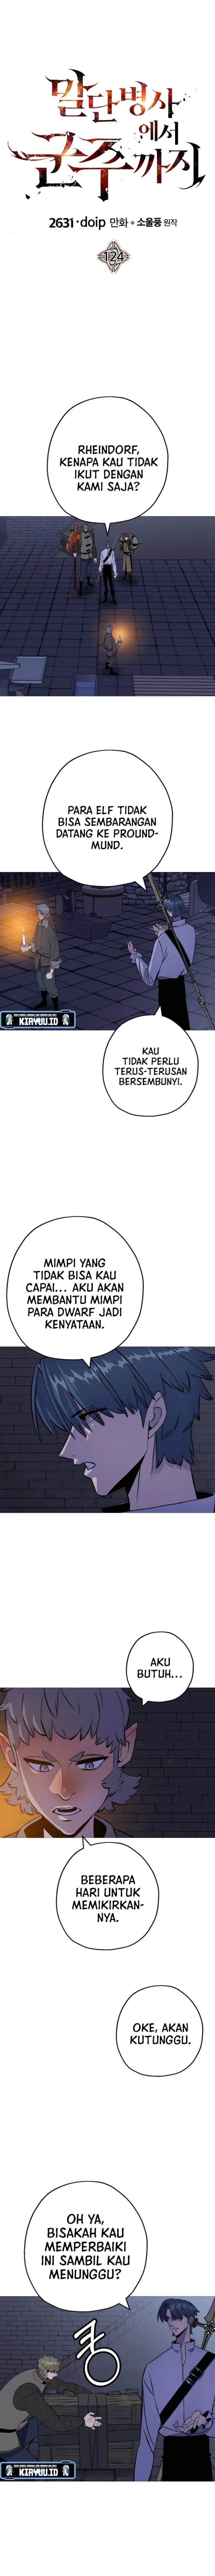 Dilarang COPAS - situs resmi www.mangacanblog.com - Komik the story of a low rank soldier becoming a monarch 124 - chapter 124 125 Indonesia the story of a low rank soldier becoming a monarch 124 - chapter 124 Terbaru 1|Baca Manga Komik Indonesia|Mangacan